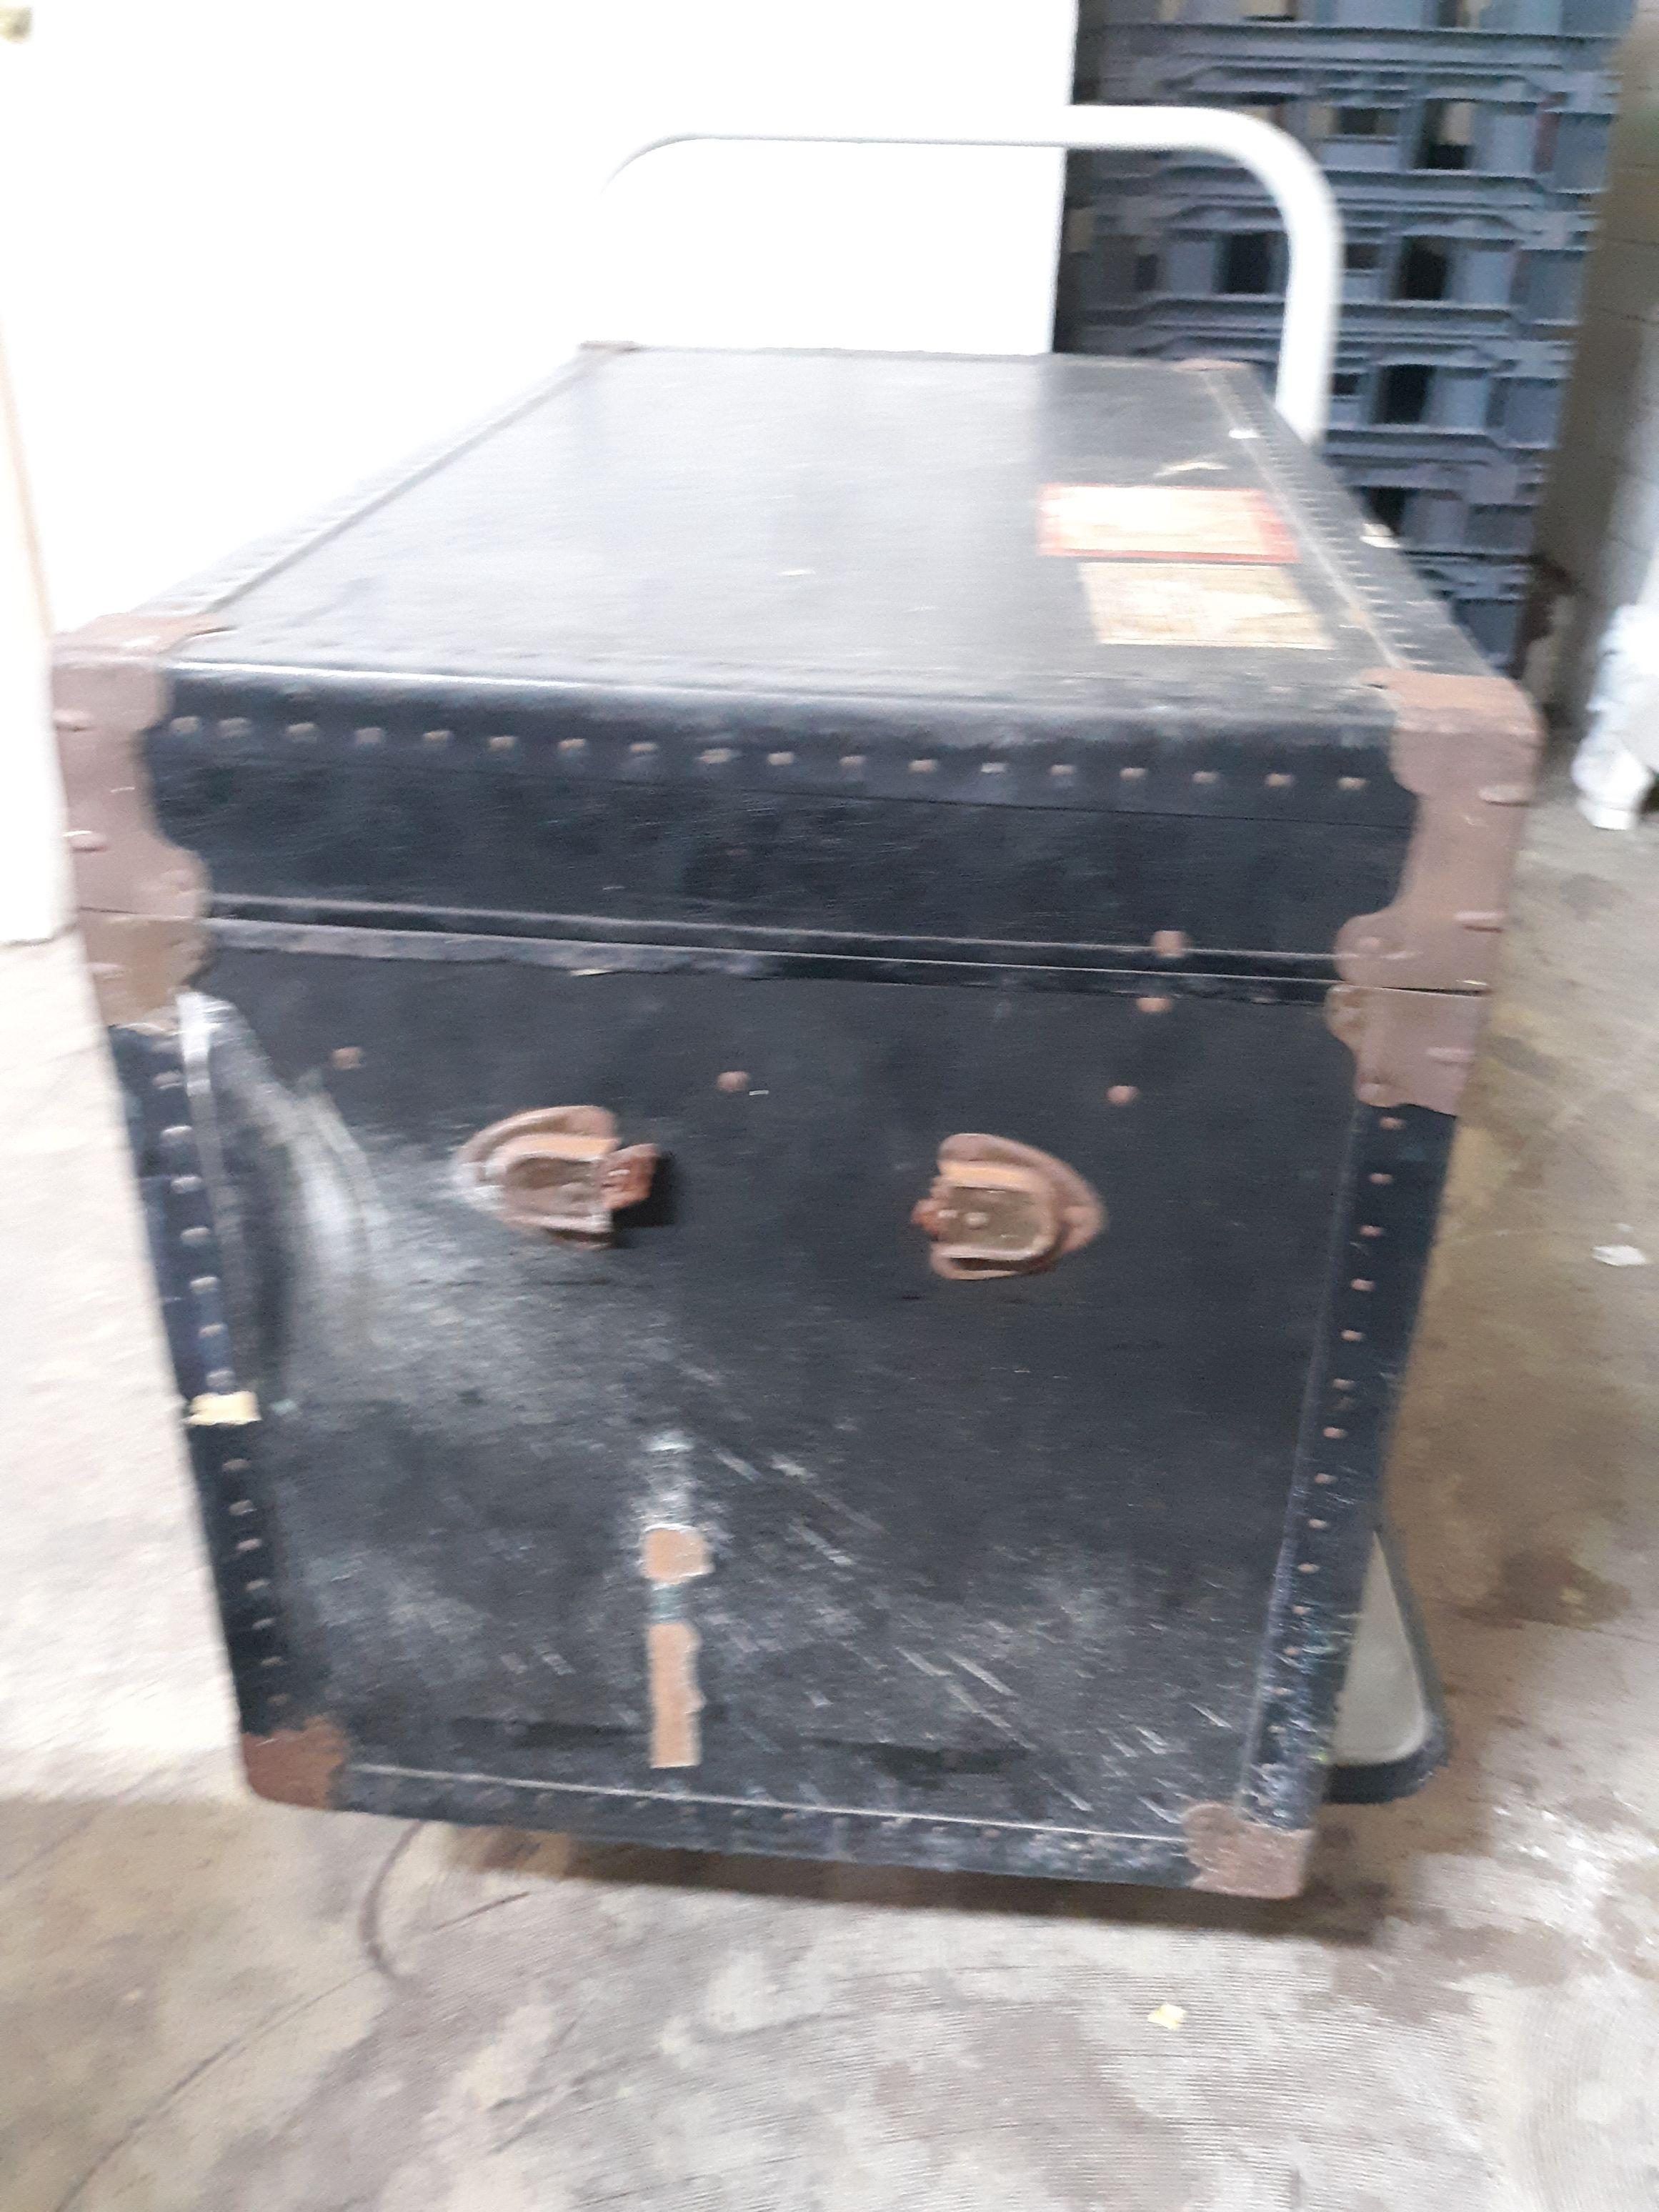 Steamer Trunk, cart not included